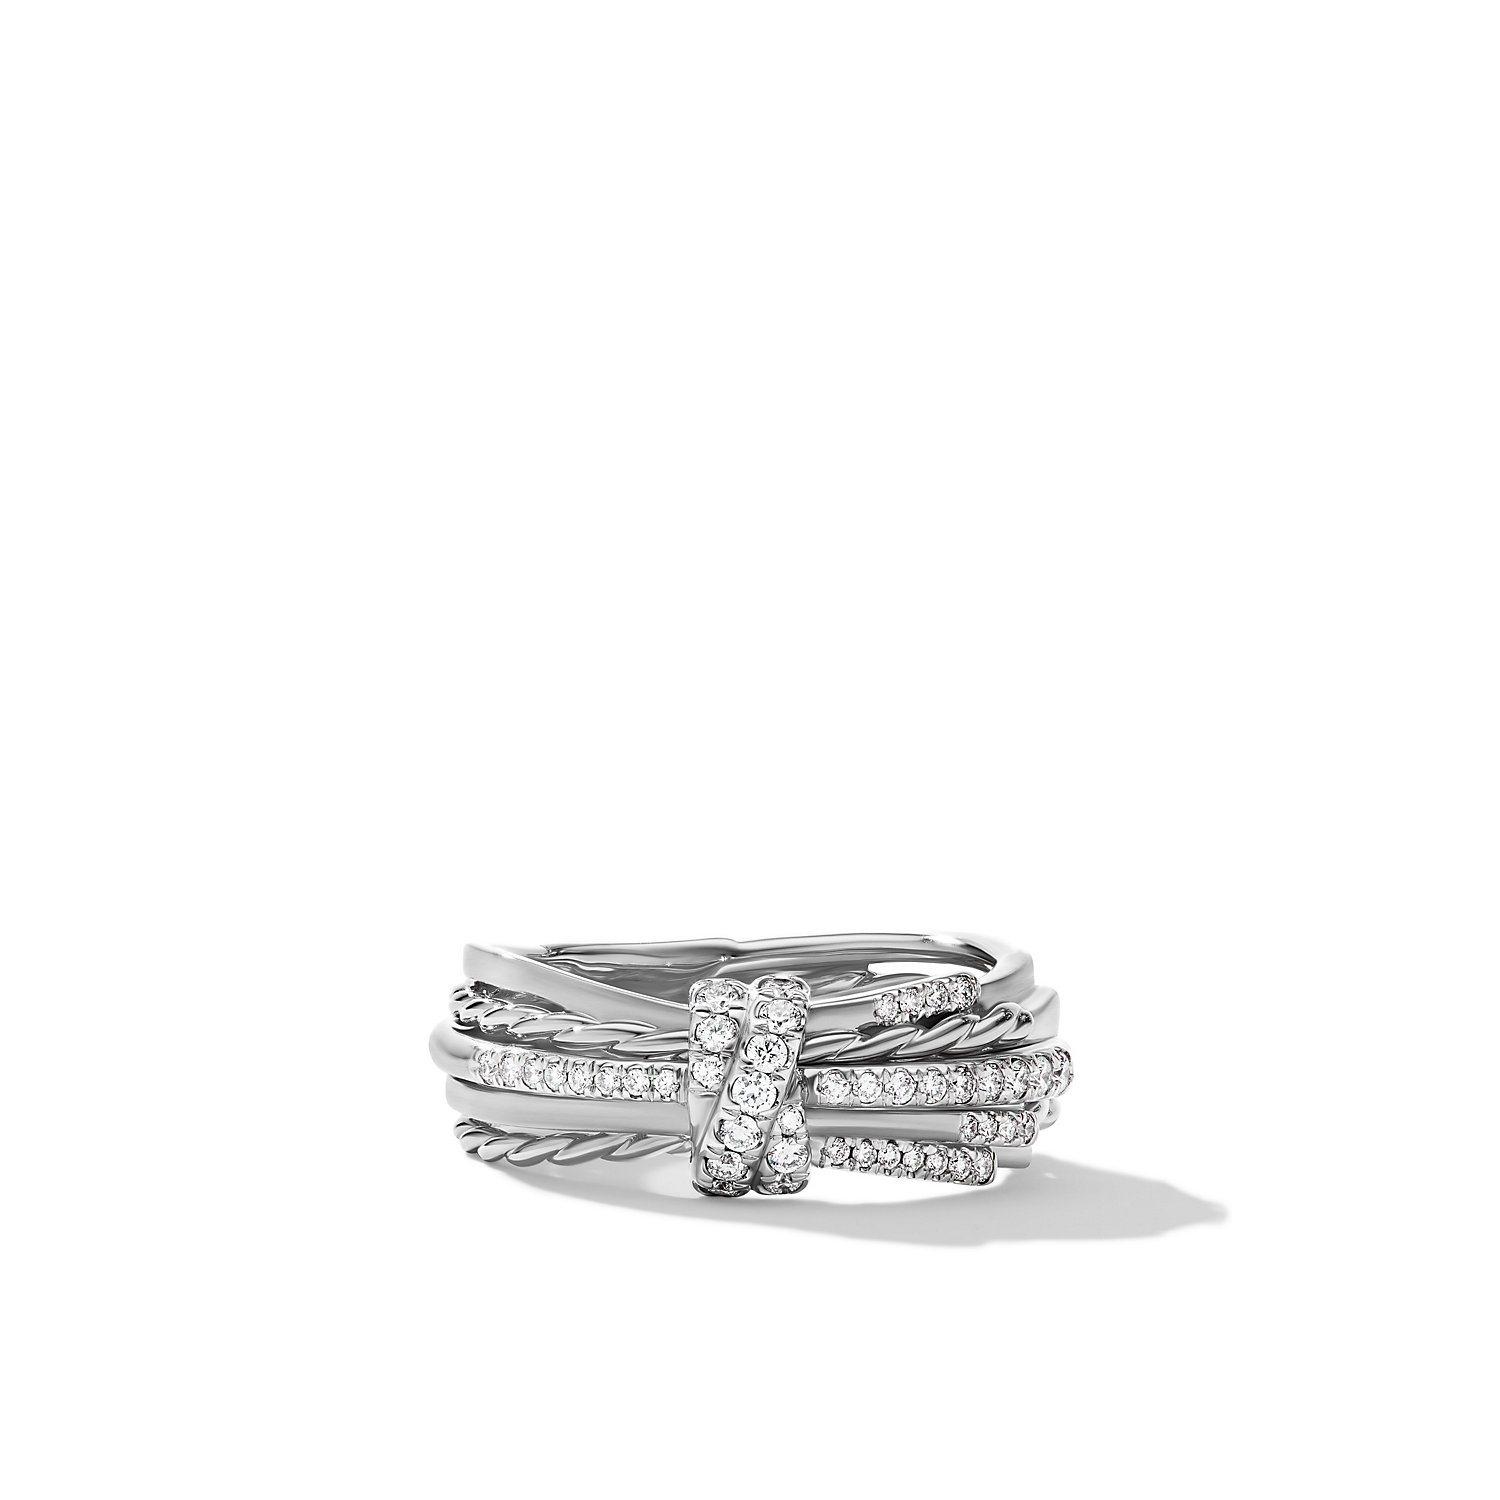 David Yurman Angelika Ring in Sterling Silver with Pave Diamonds, size 6